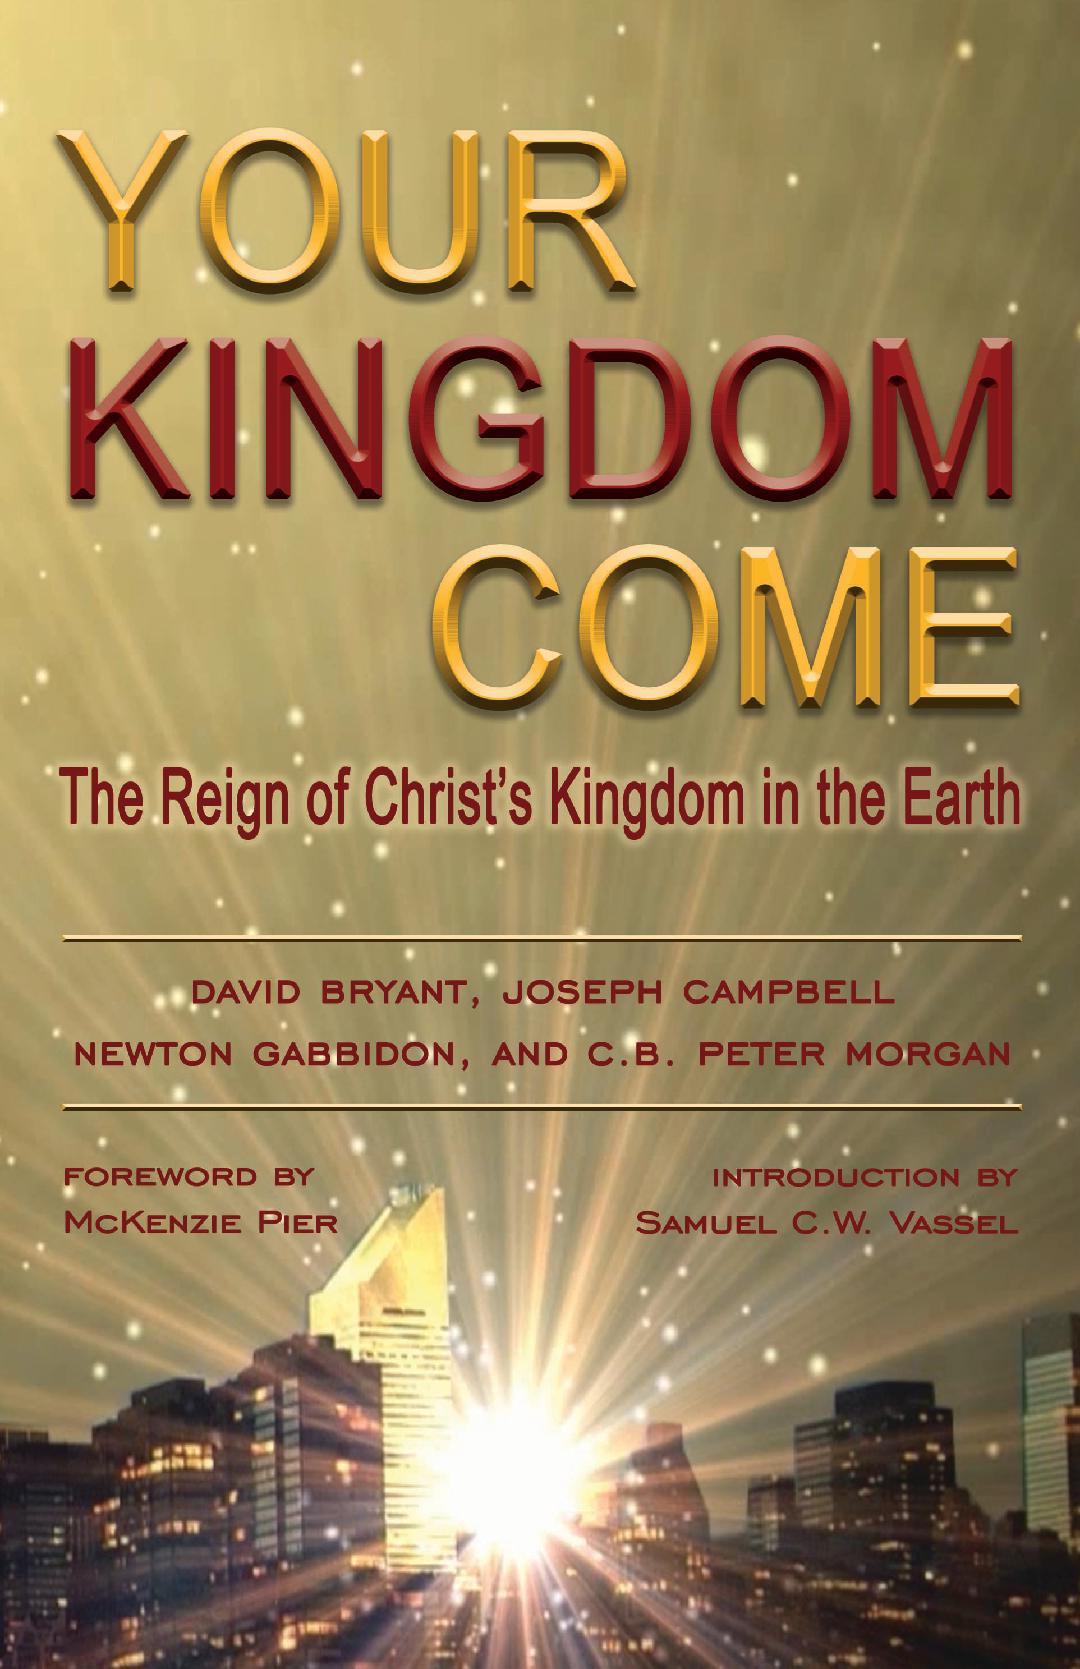 your_kingdom-come-book_cover.jpg